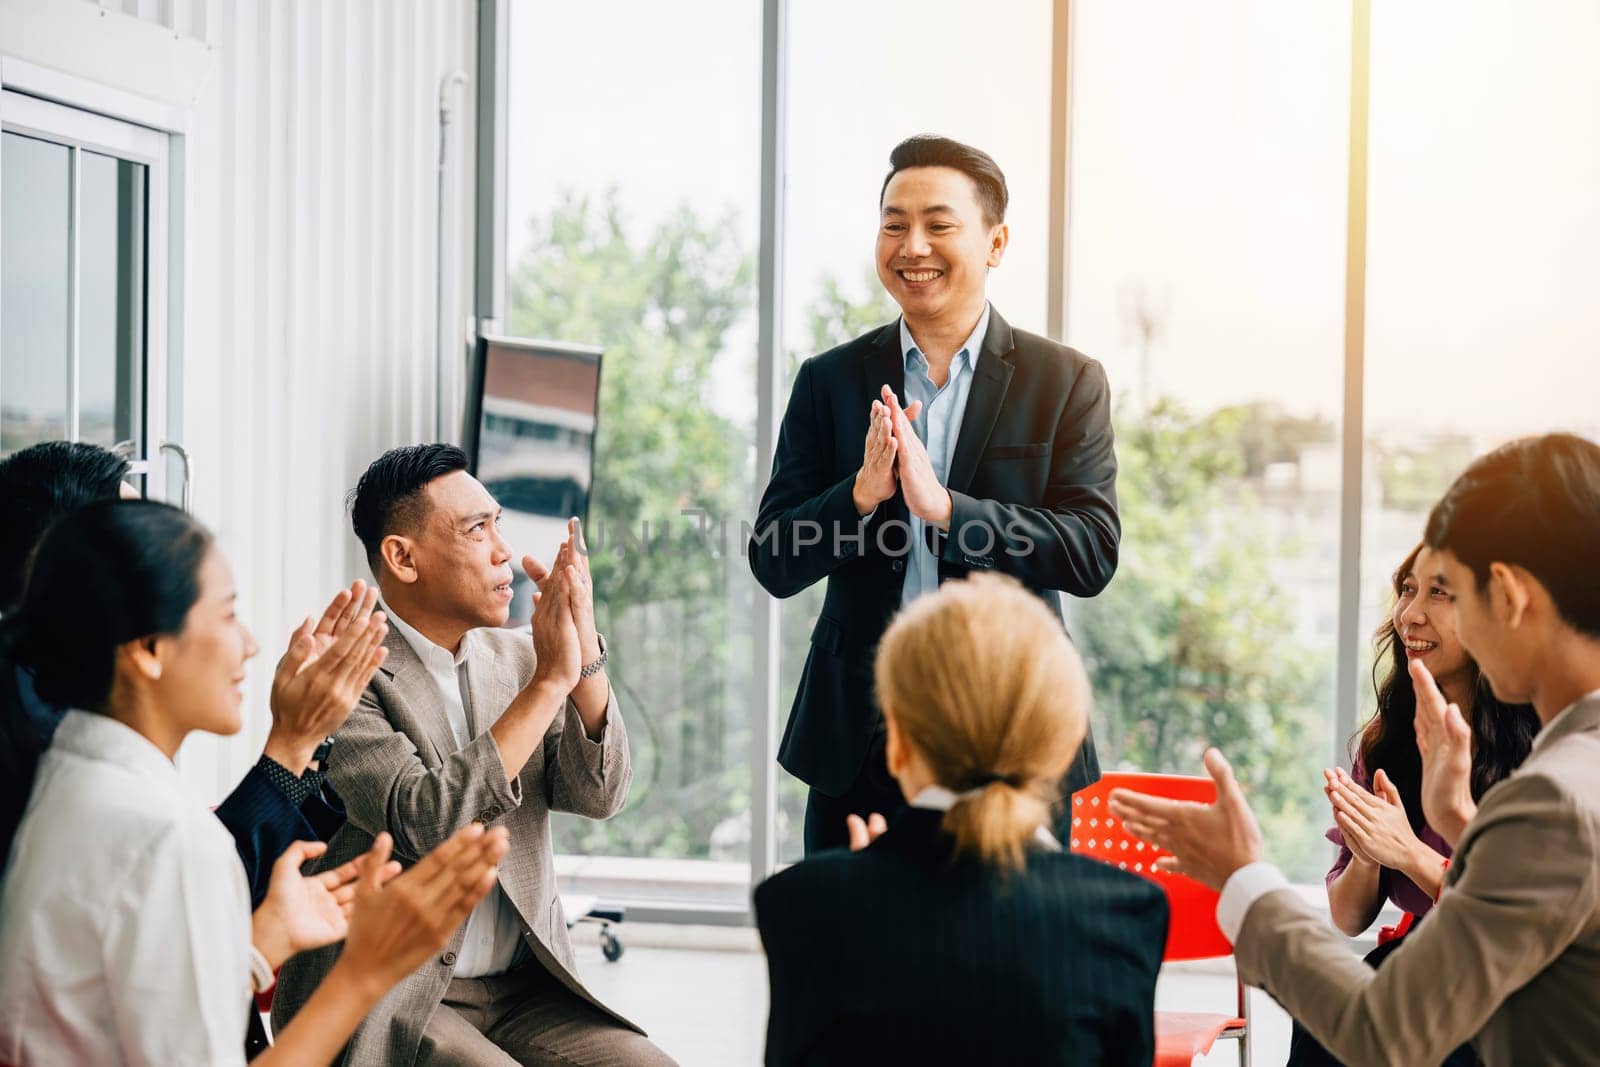 In a meeting, a male speaker shares expertise with the diverse audience. Participants actively raise their hands, asking questions and exemplifying teamwork, learning, and support. by Sorapop